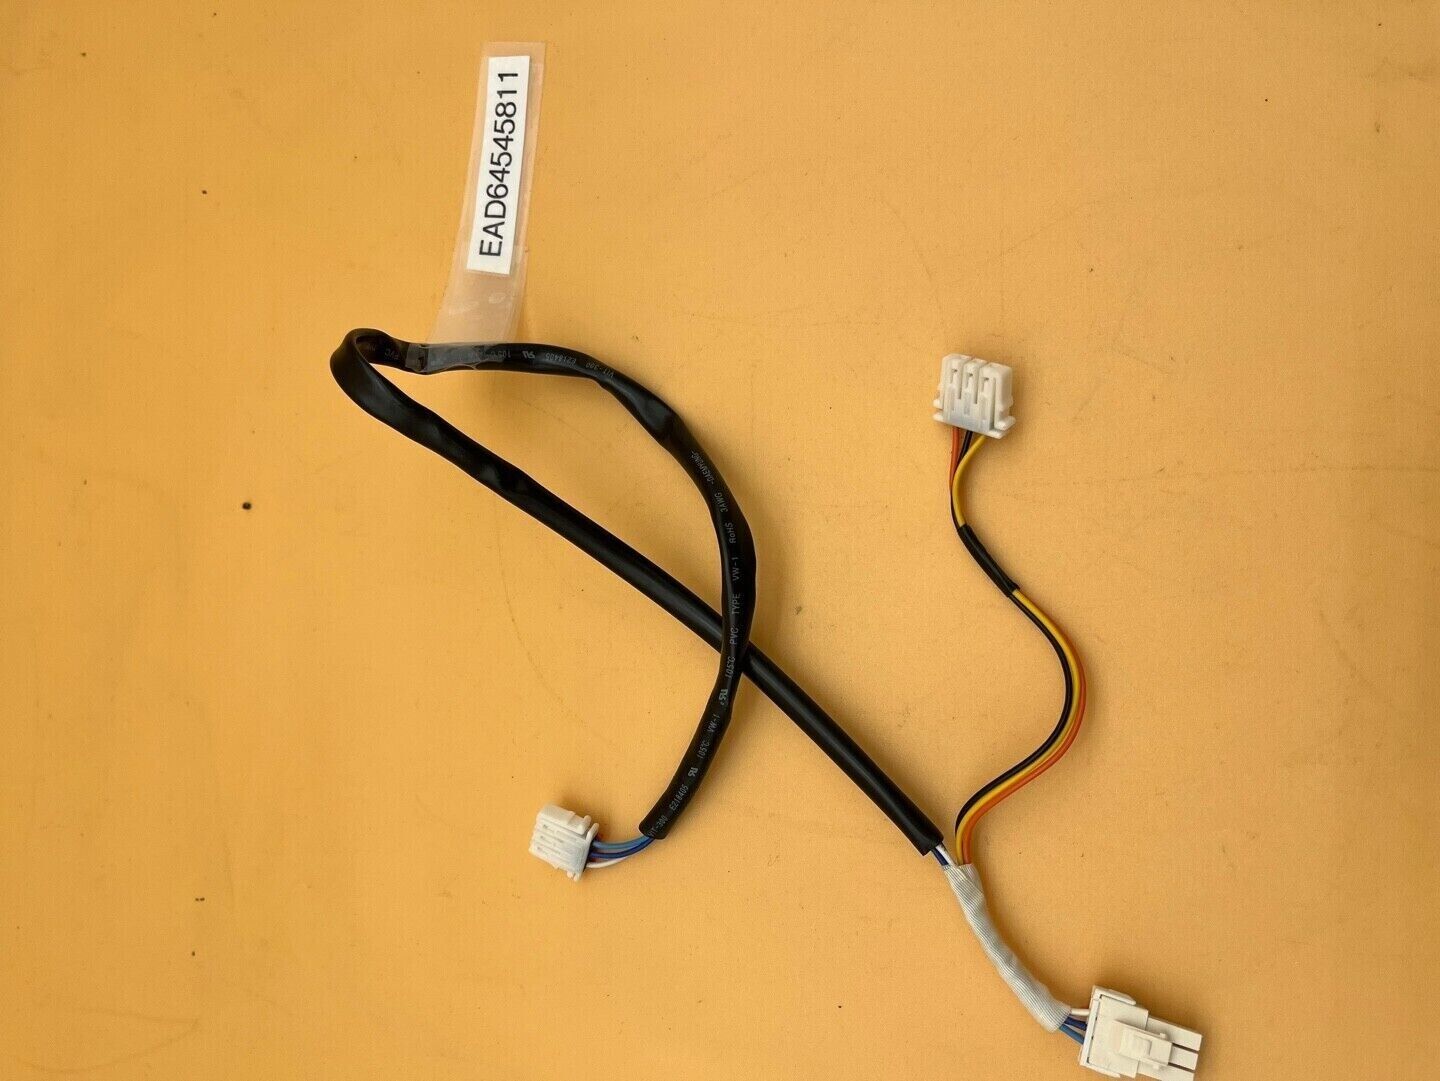 LG EAD64545811 Washer Wire Harness